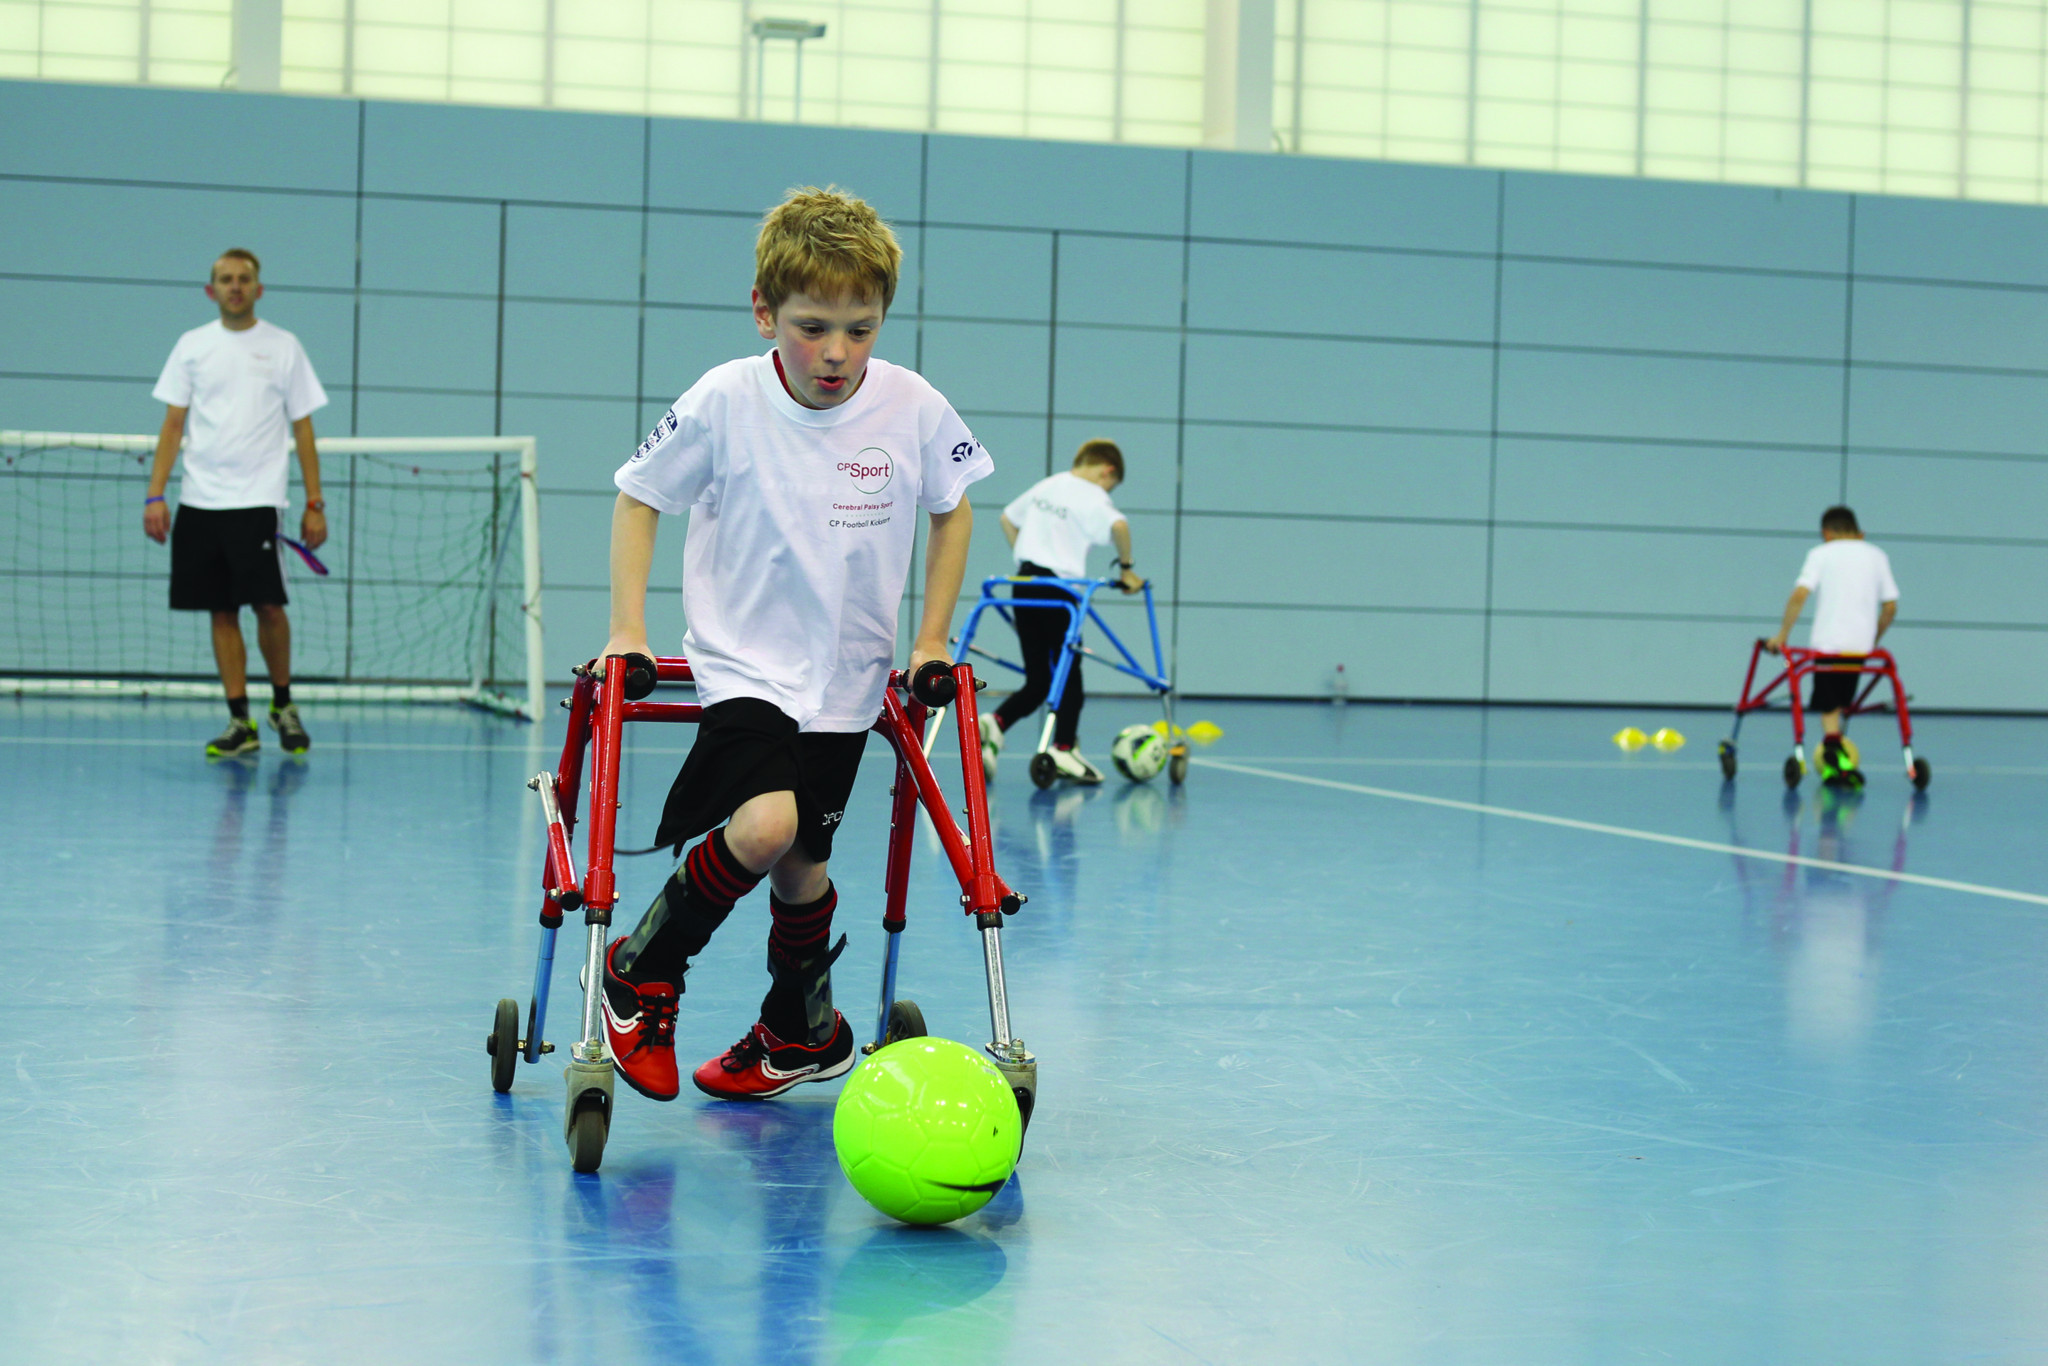 Results of new research released by national charity Cerebral Palsy Sport has confirmed that adapting sports can enable and encourage more people to take part and enjoy sport and physical activity ©Cerebral Palsy Sport